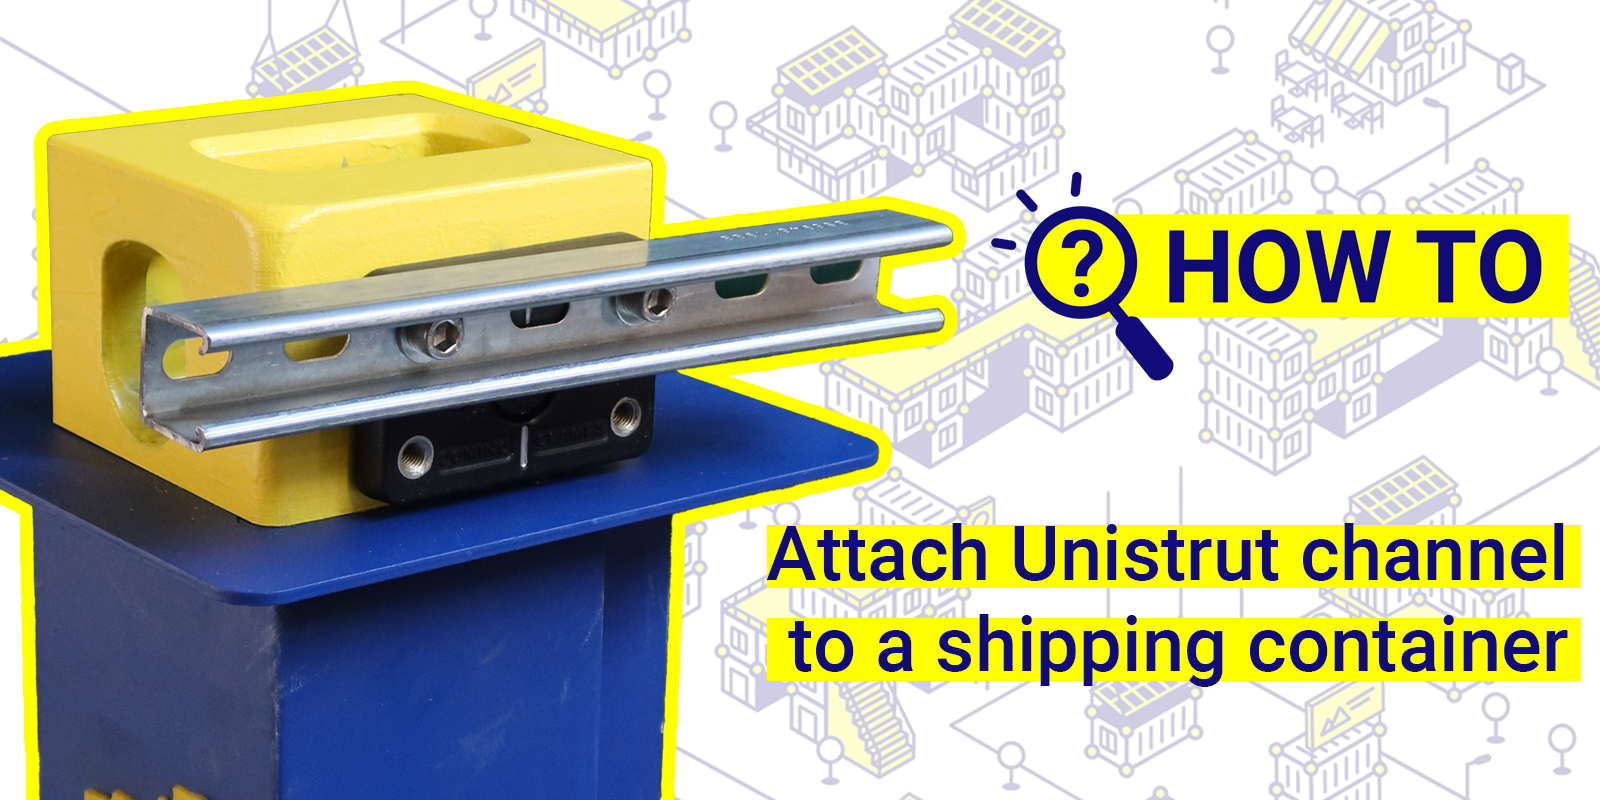 How to attach Unistrut channel to a shipping container